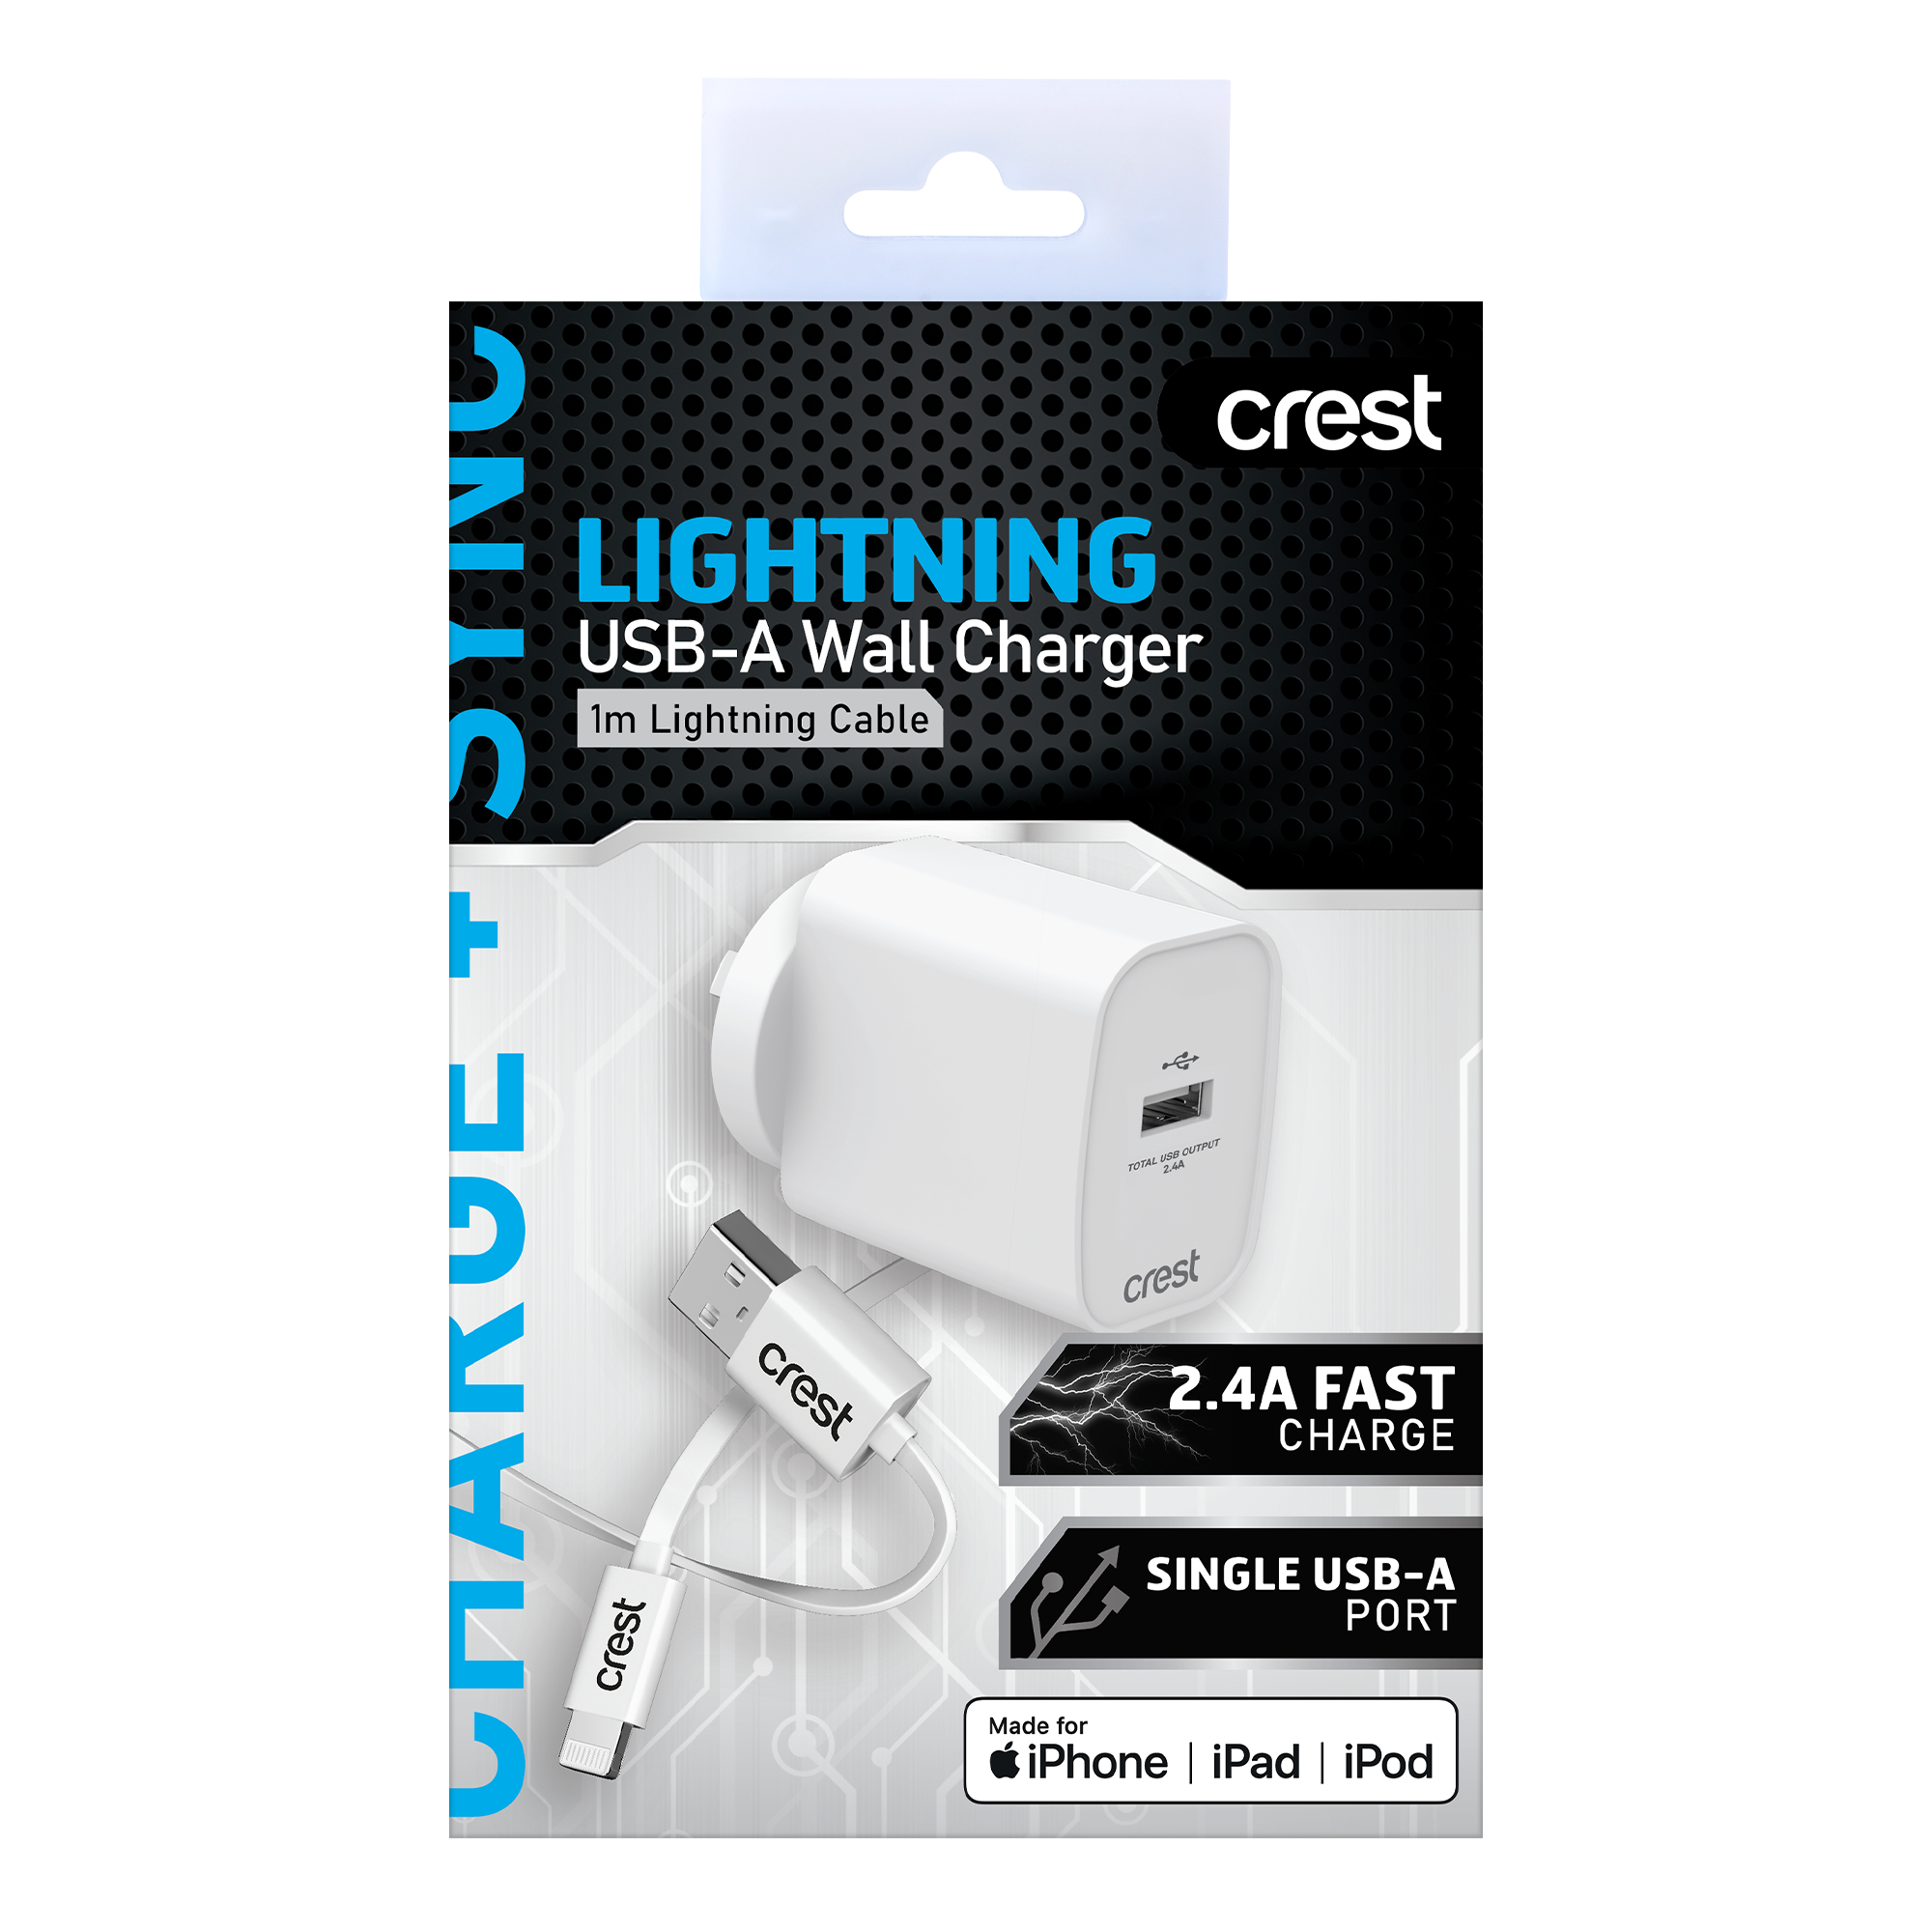 USB Wall Charger & Lightning Cable